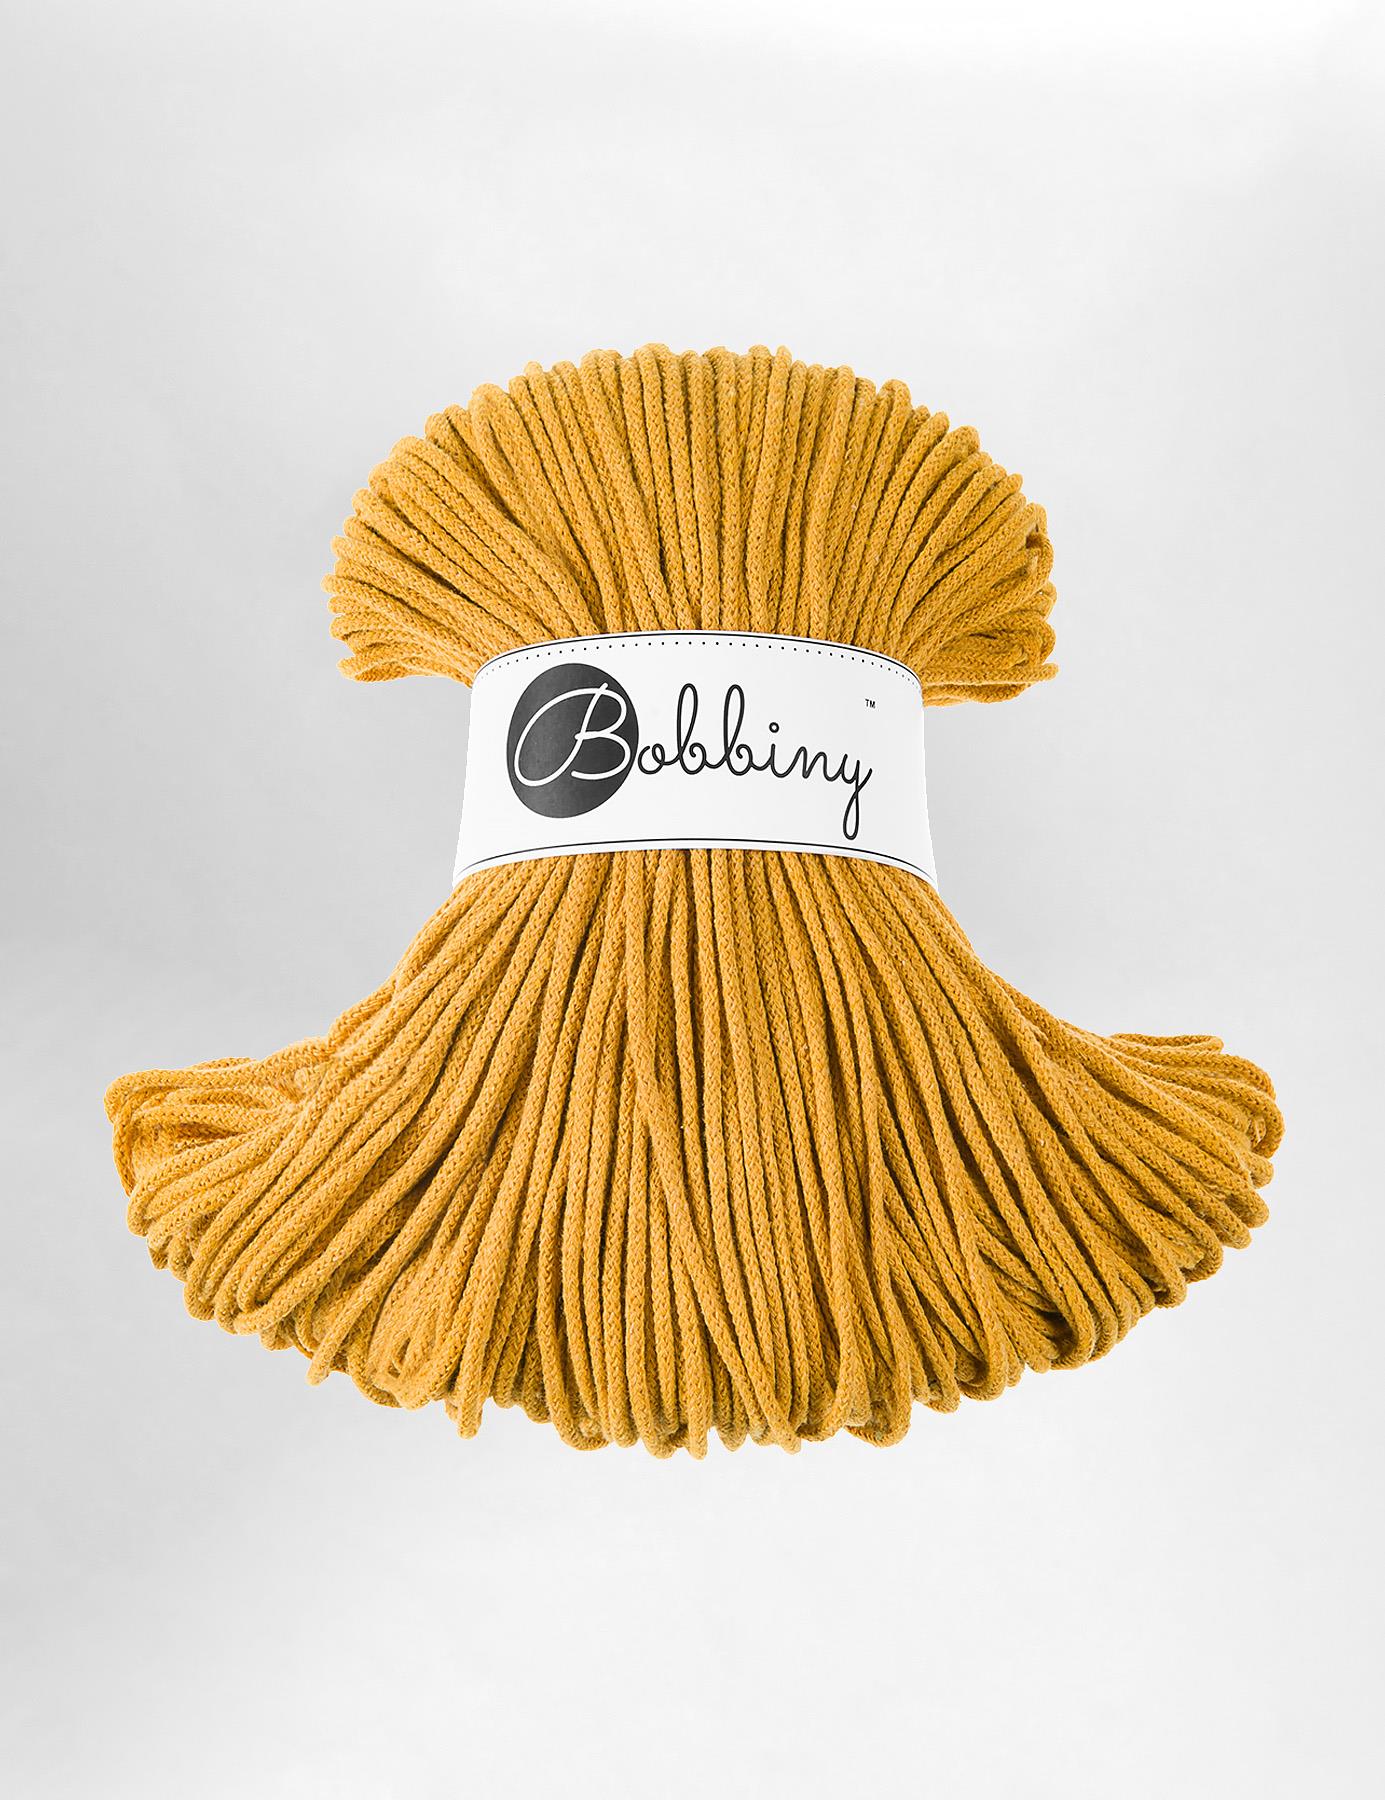 3mm Mustard recycled cotton macrame cord by Bobbiny (100m)